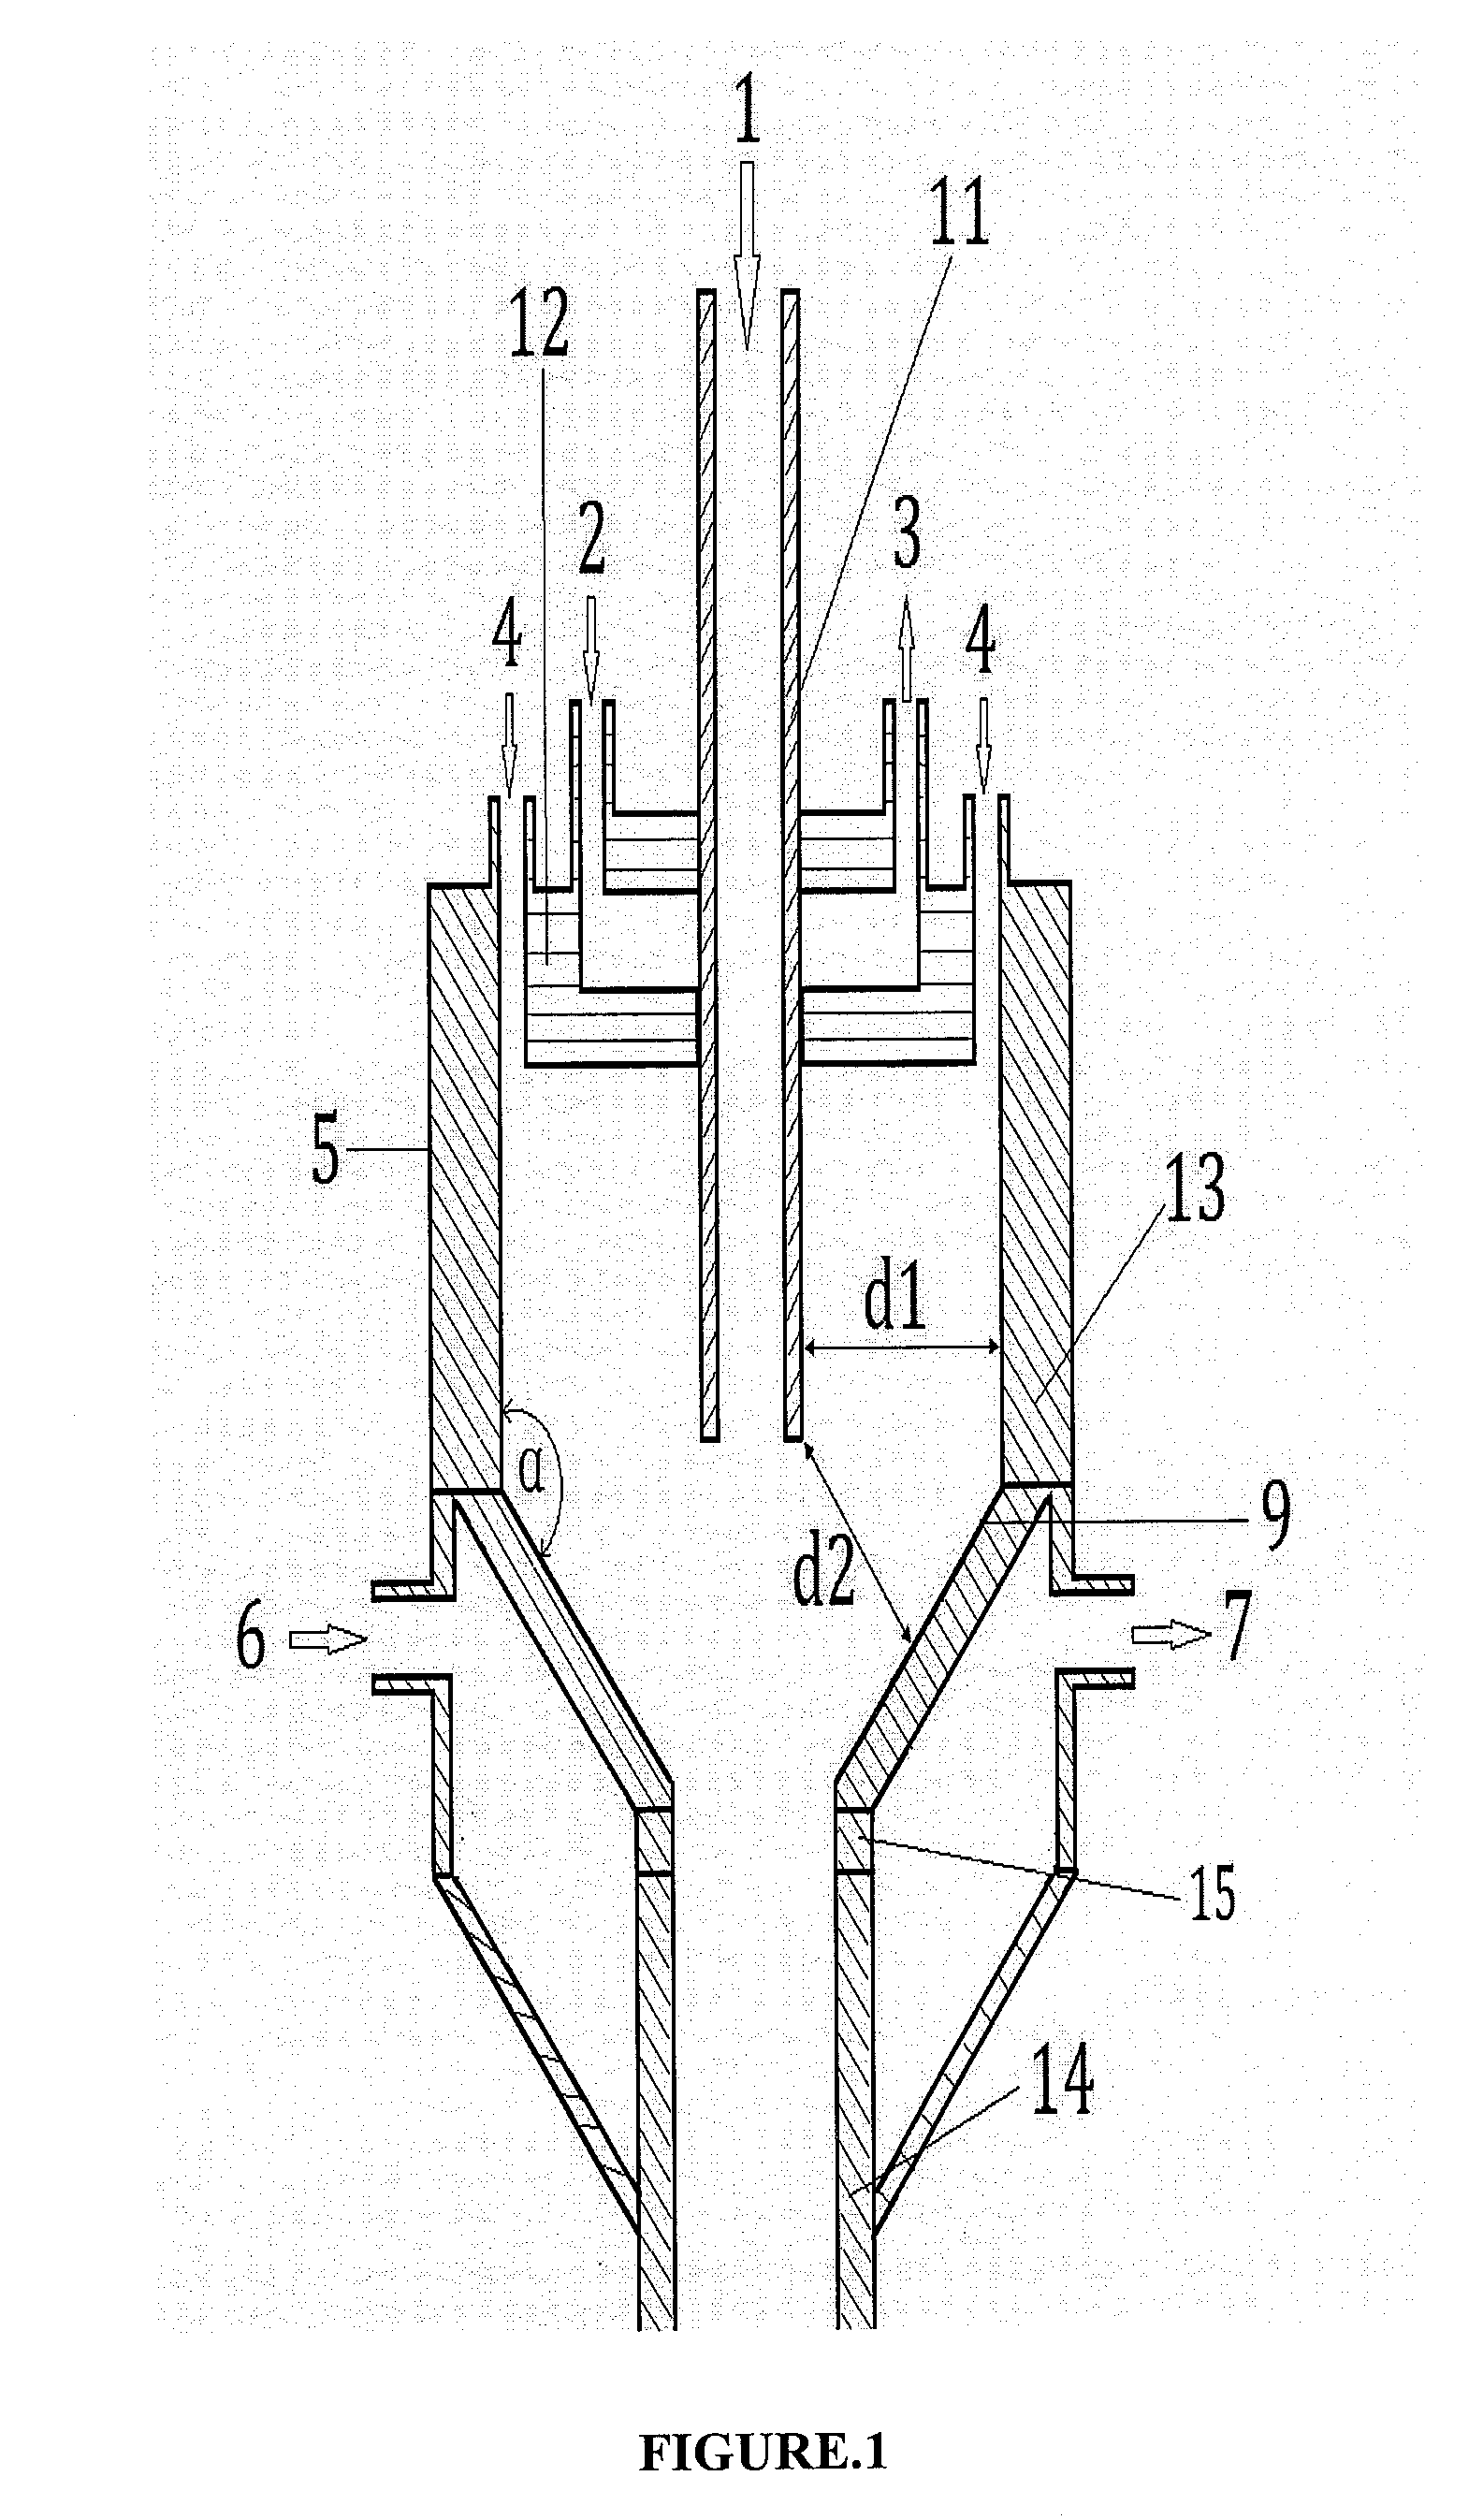 Multi-stage plasma reactor system with hollow cathodes for cracking carbonaceous material